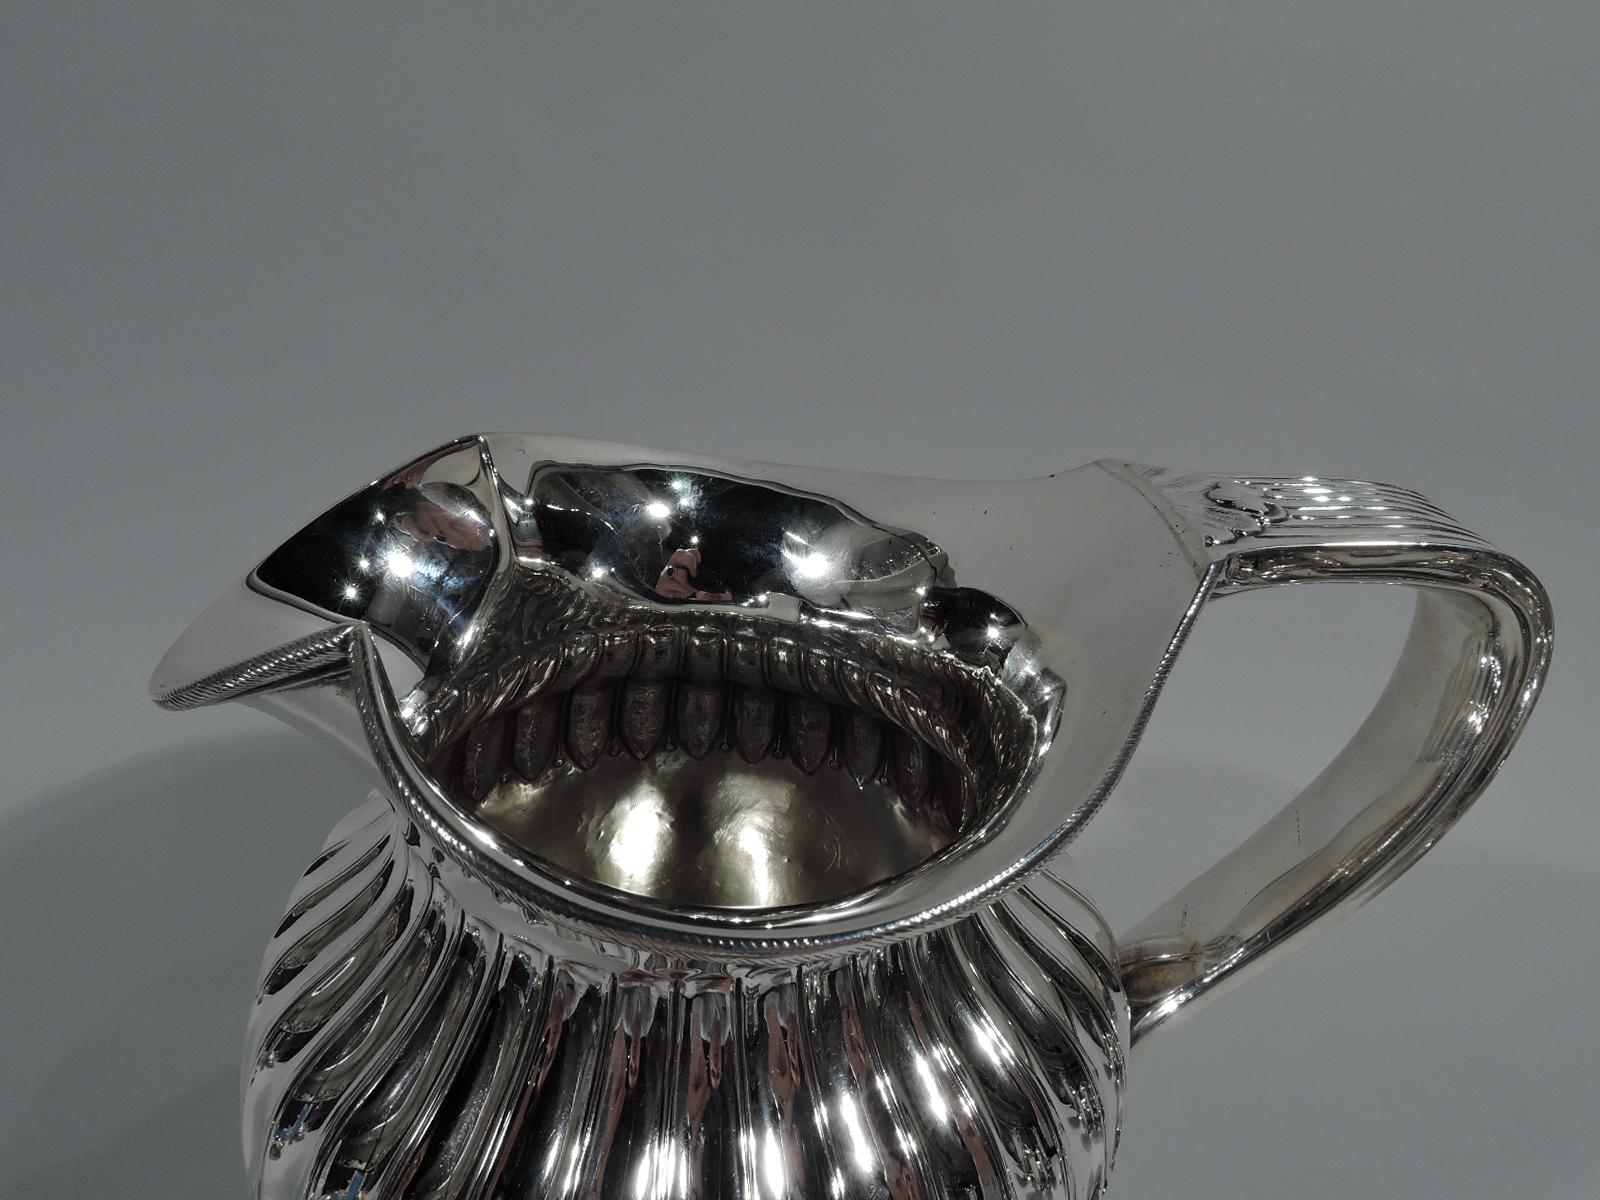 Victorian Classical sterling silver water pitcher. Made by Edward John Wells in London in 1880. Ovoid body with fluted leaf-and-dart on shoulder. Ribbed scroll-bracket handle with leaf cap and mount. Wide and round mouth with shaped spout. Cabled